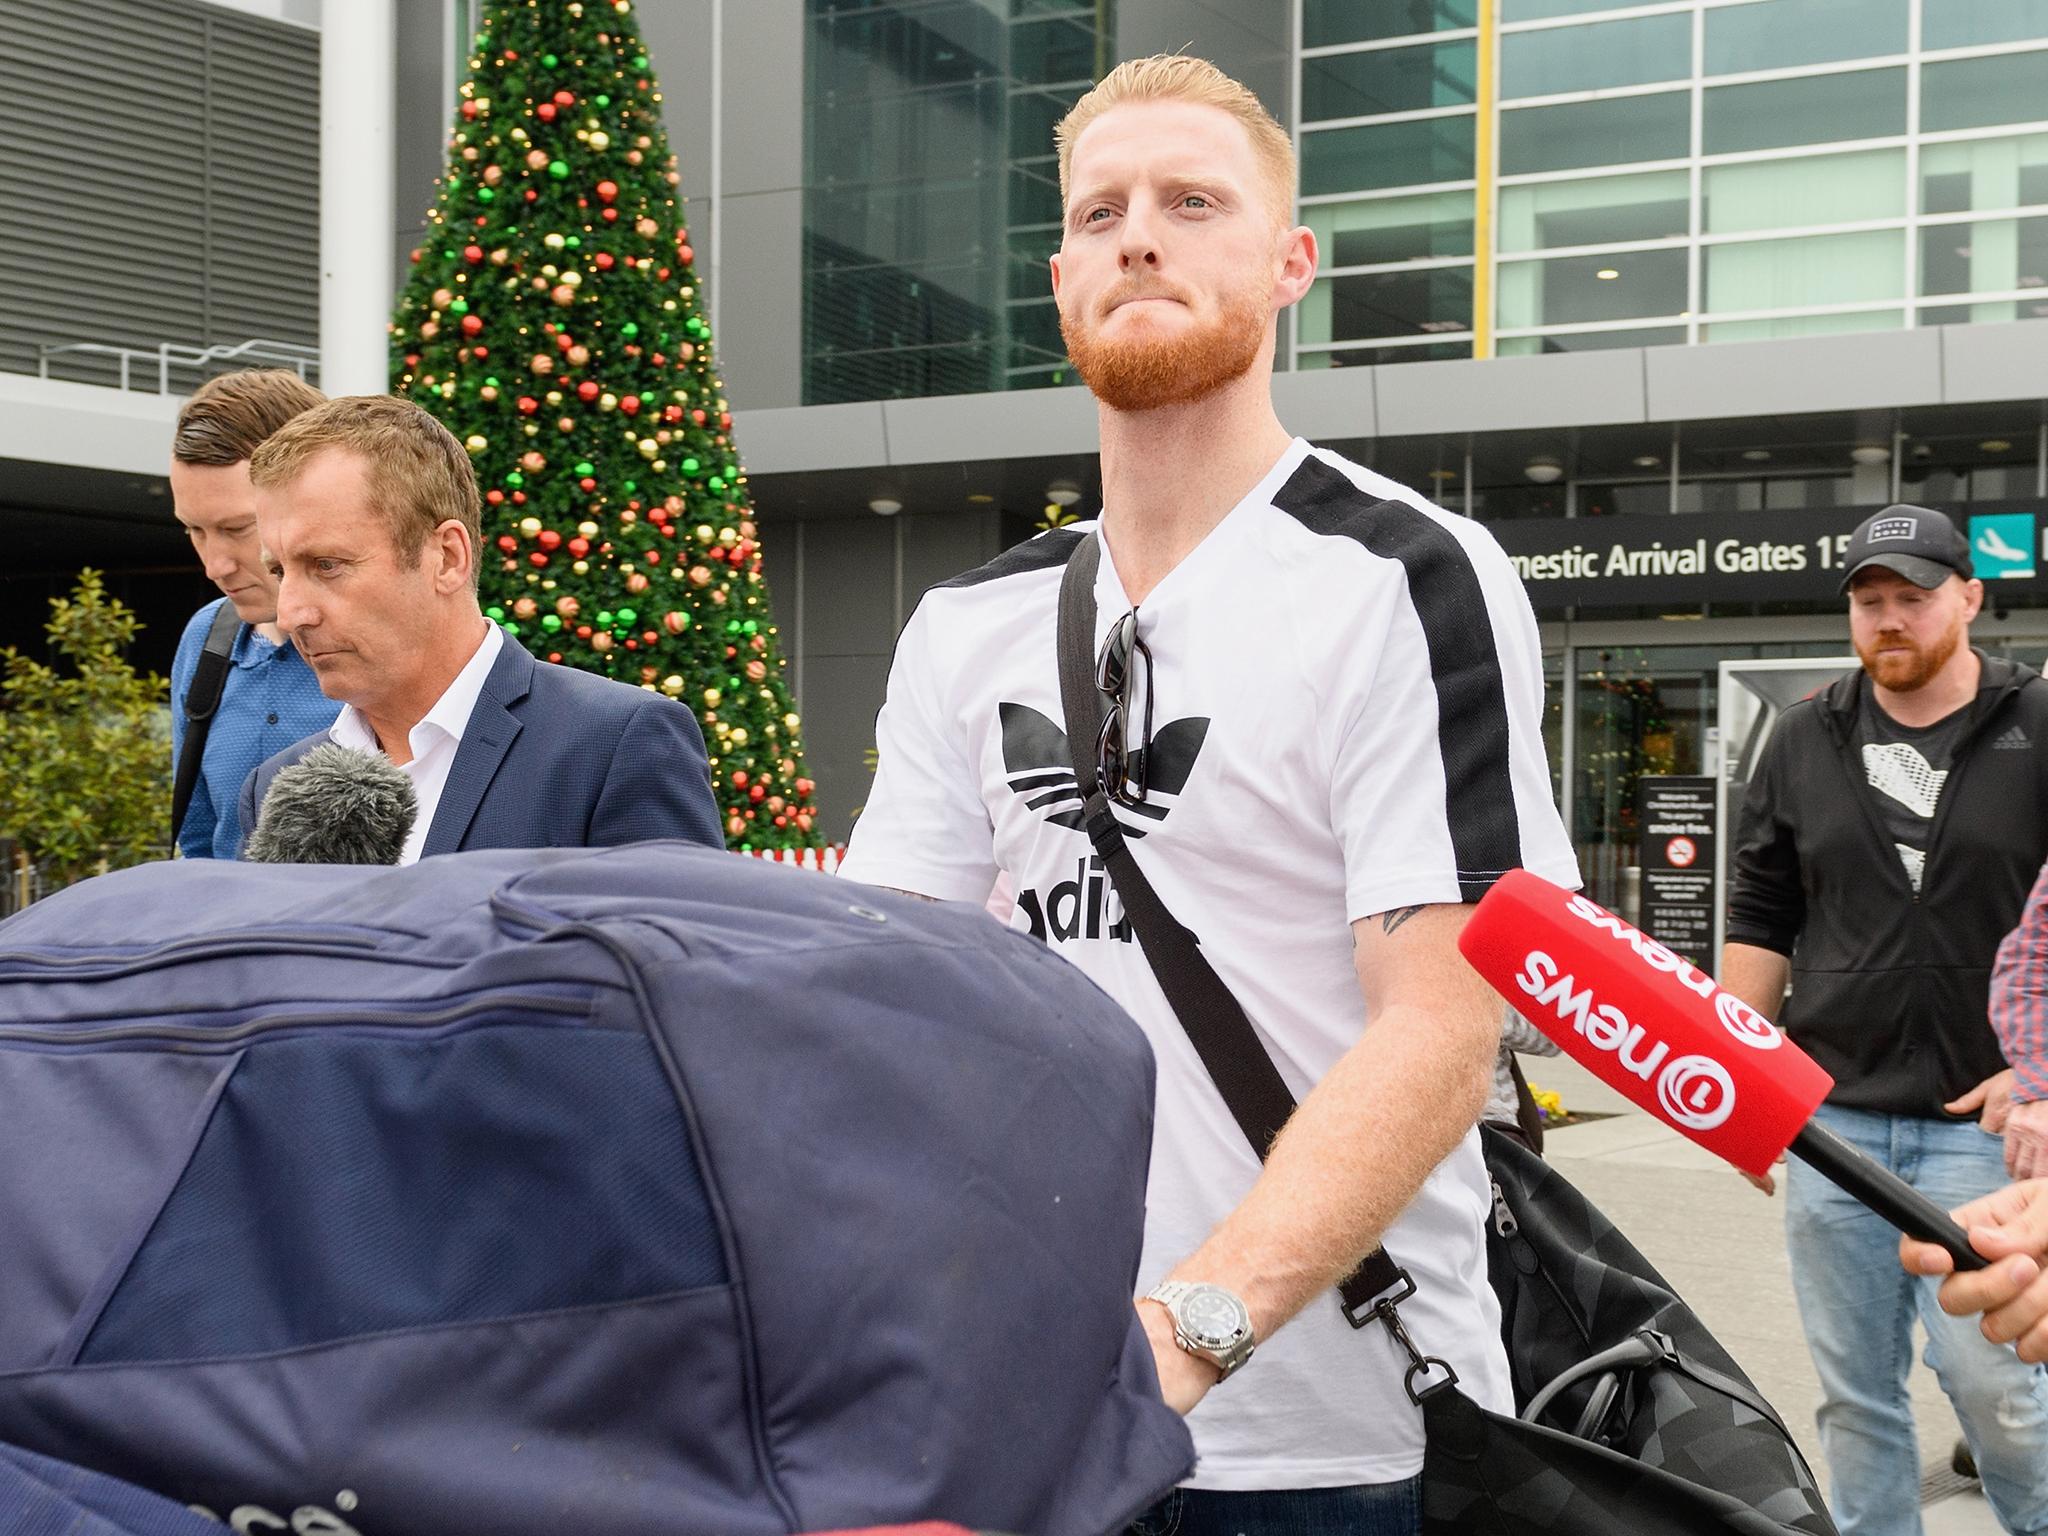 Ben Stokes has joined Canterbury to play in their one-day and Twenty20 side